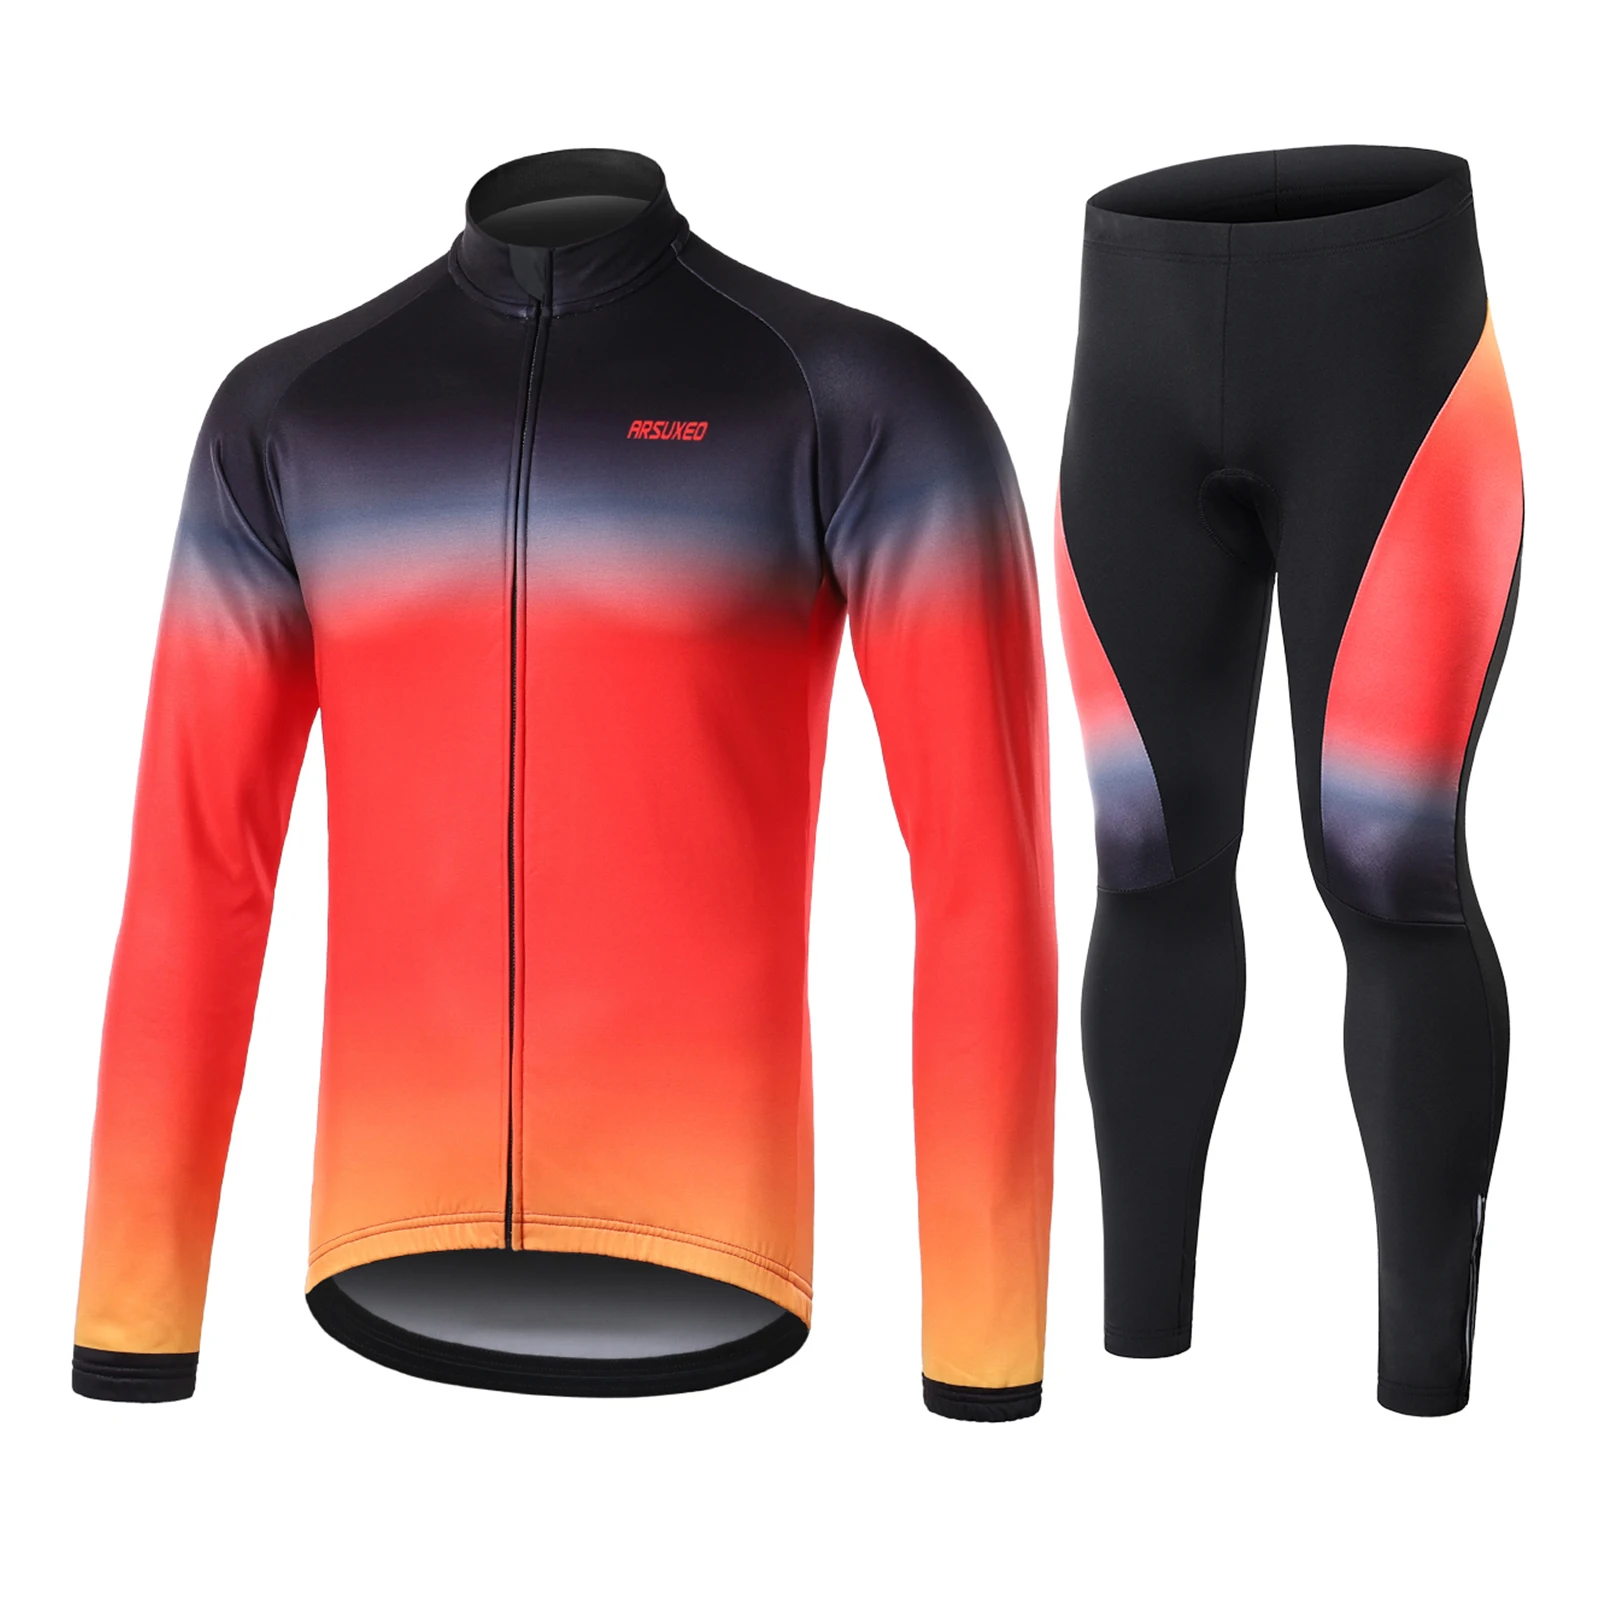 Winter Cycling Men Jersey Set Long Sleeve Fleece Lined Warm Mountain Road Bicycle Shirt with Padded Pants Bike Jacket Outfit